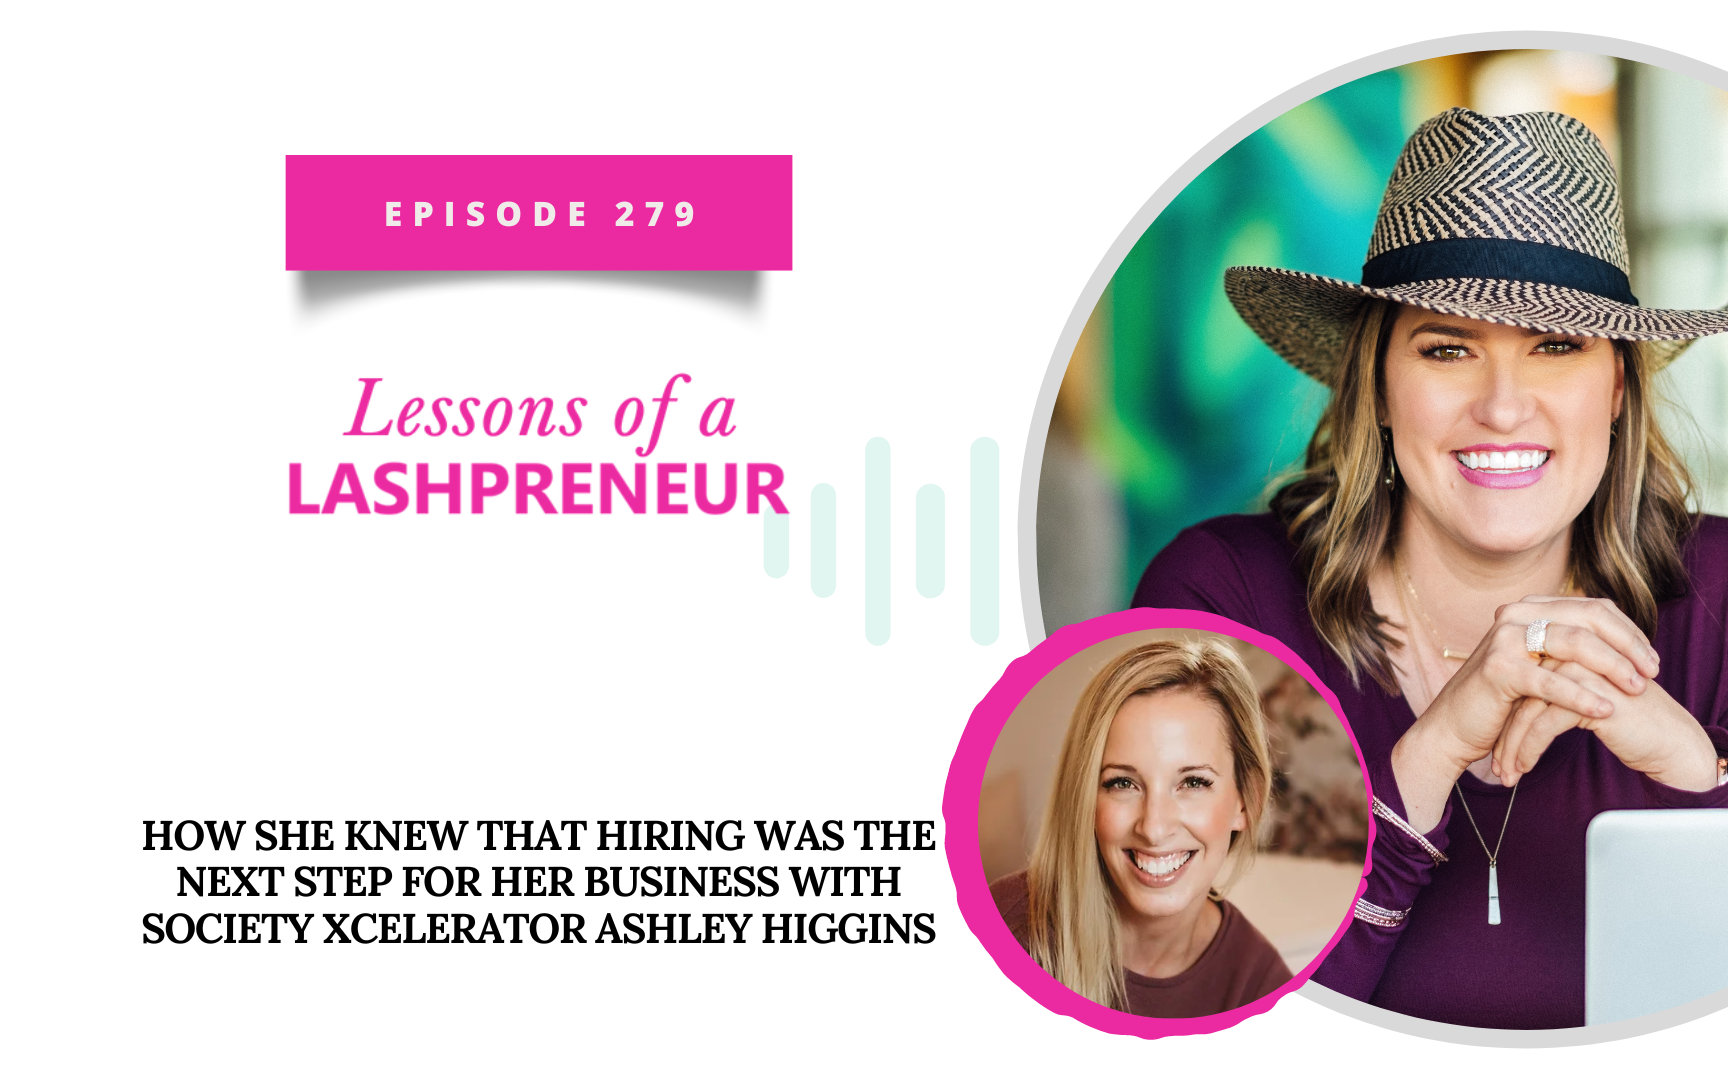 How She Knew that Hiring was the Next Step for Her Business with Society Xcelerator Ashley Higgins